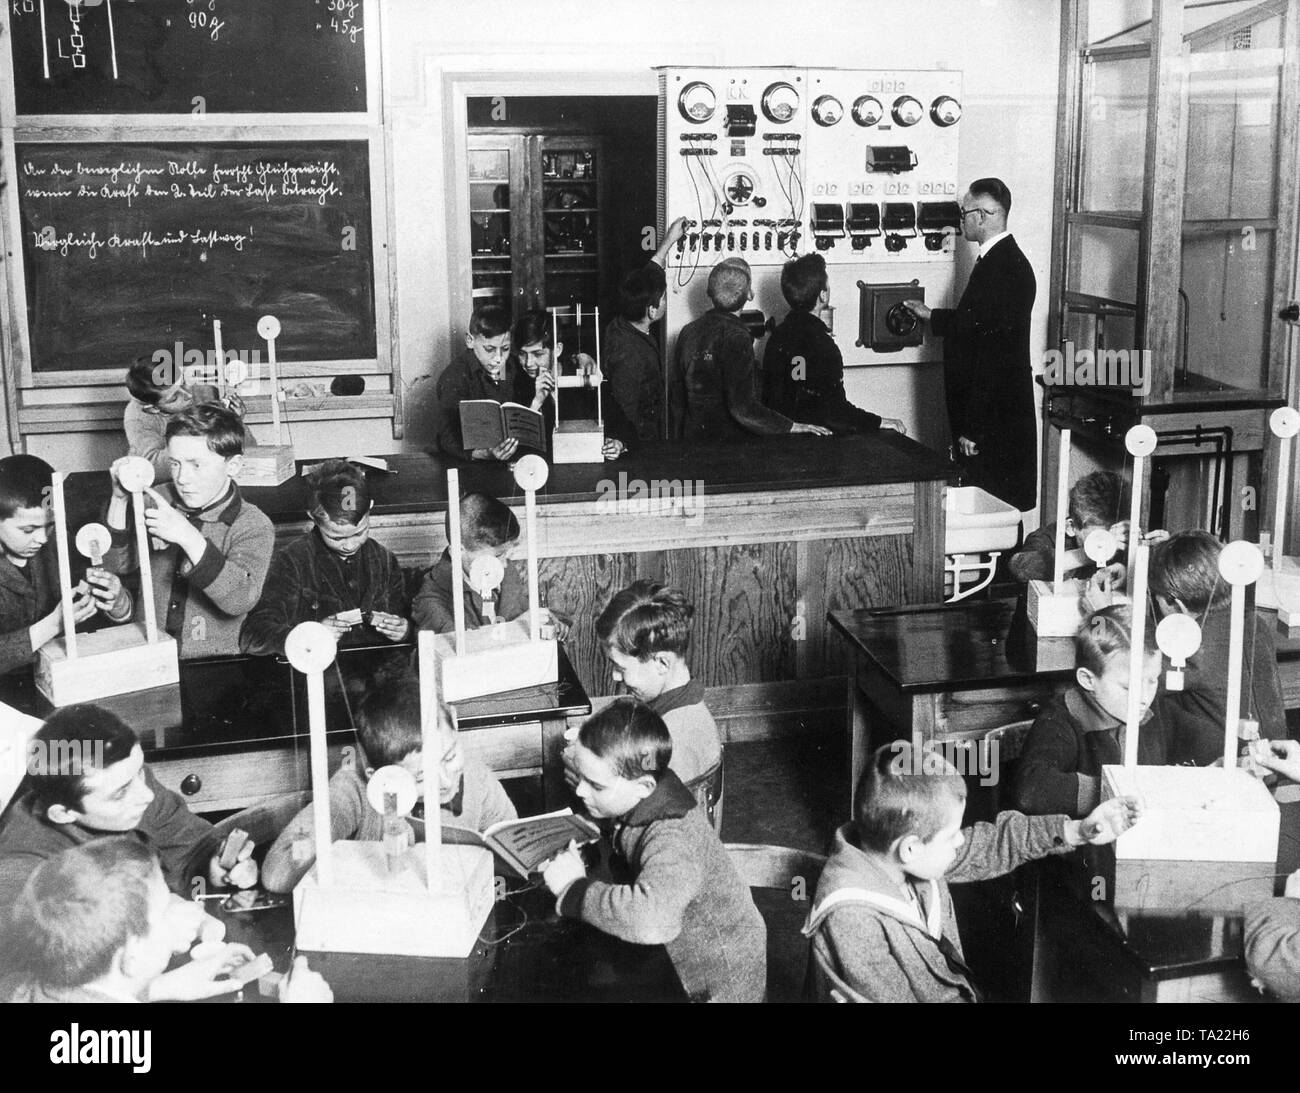 The 'Ideal school' in Kaulsdorf, Berlin, Germany in 1928. A new school was set up according to the most modern principles. In addition to ordinary classrooms there was a public library, workshops, school kitchen and reading room. The picture shows a physics class with electrical panel Stock Photo